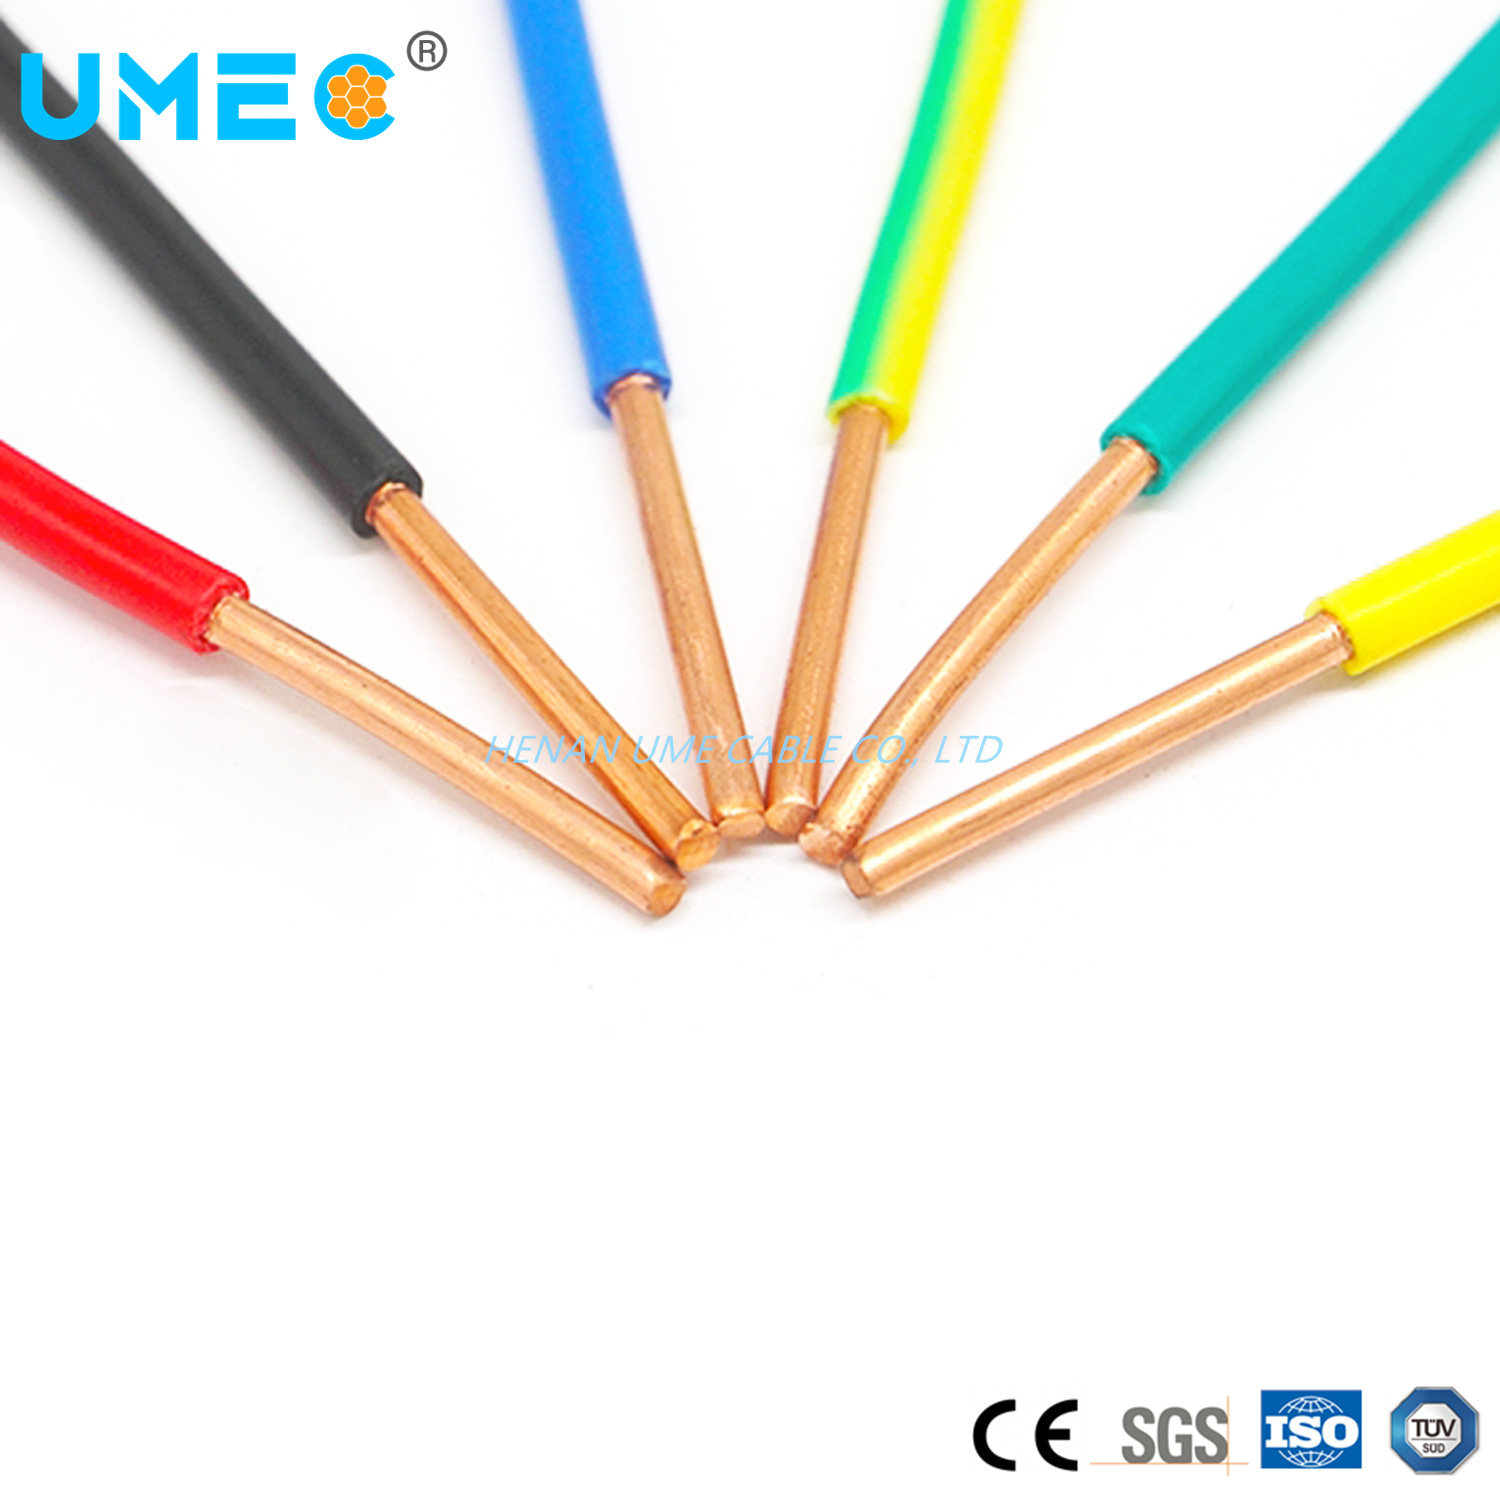 PVC Coated Copper Wire for Building House Wiring Single Core Electrical Wire 10mm 95mm 120mm